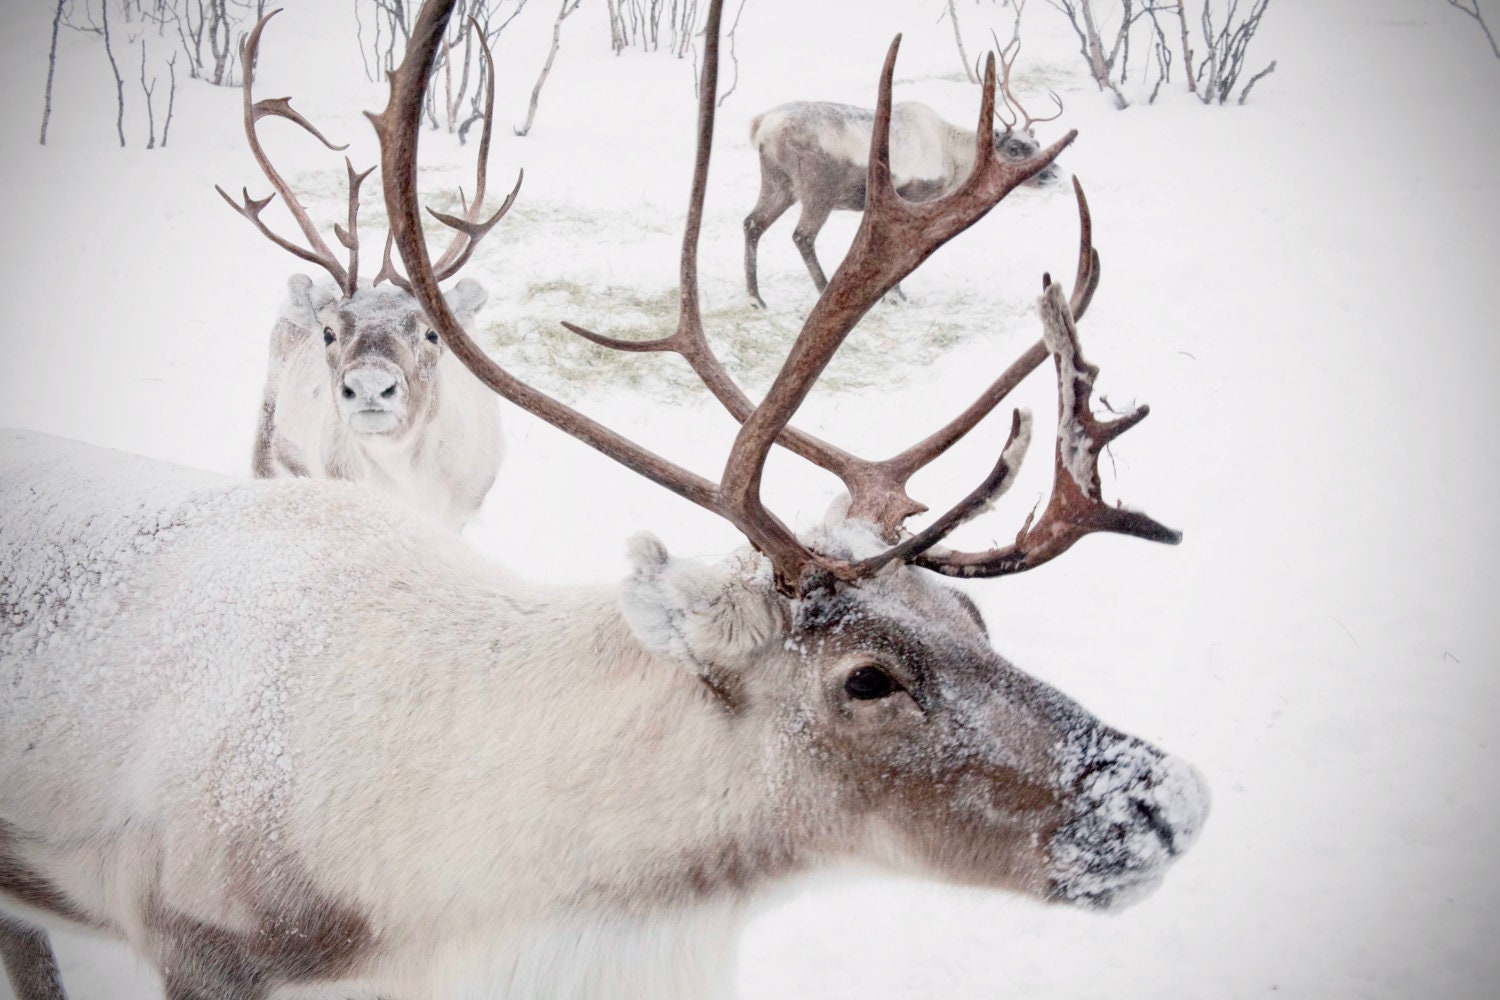 Large Wall Art-Winter Reindeer Photo-Christmas in Norway Snow-Home Decor-Fine art Photography-16x20 - sarahnatsumi